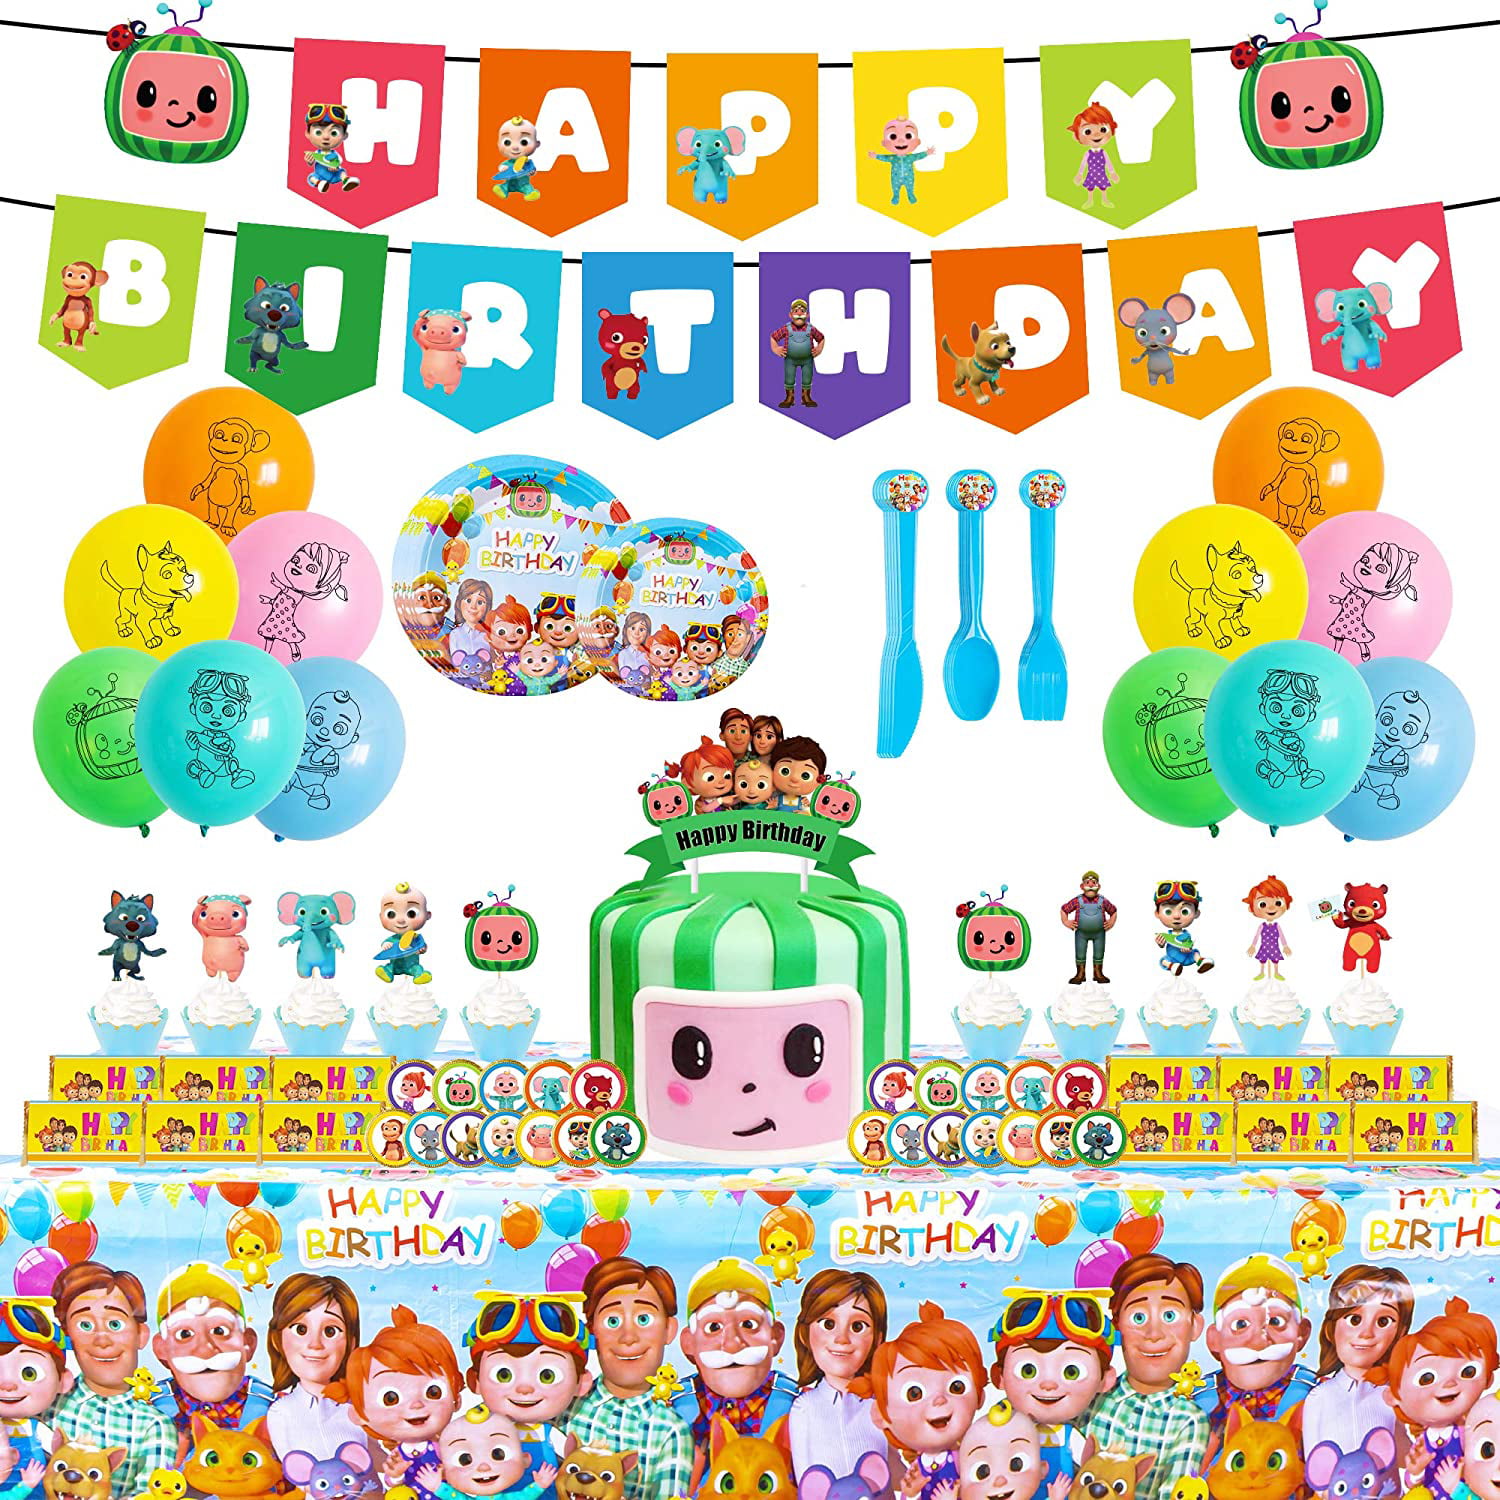 Cocomelon Birthday Party Supplies 125 Pcs Birthday Party Decorations Include Happy Birthday Banner Table Cover Toppers Tableware Balloons Walmart Com Walmart Com